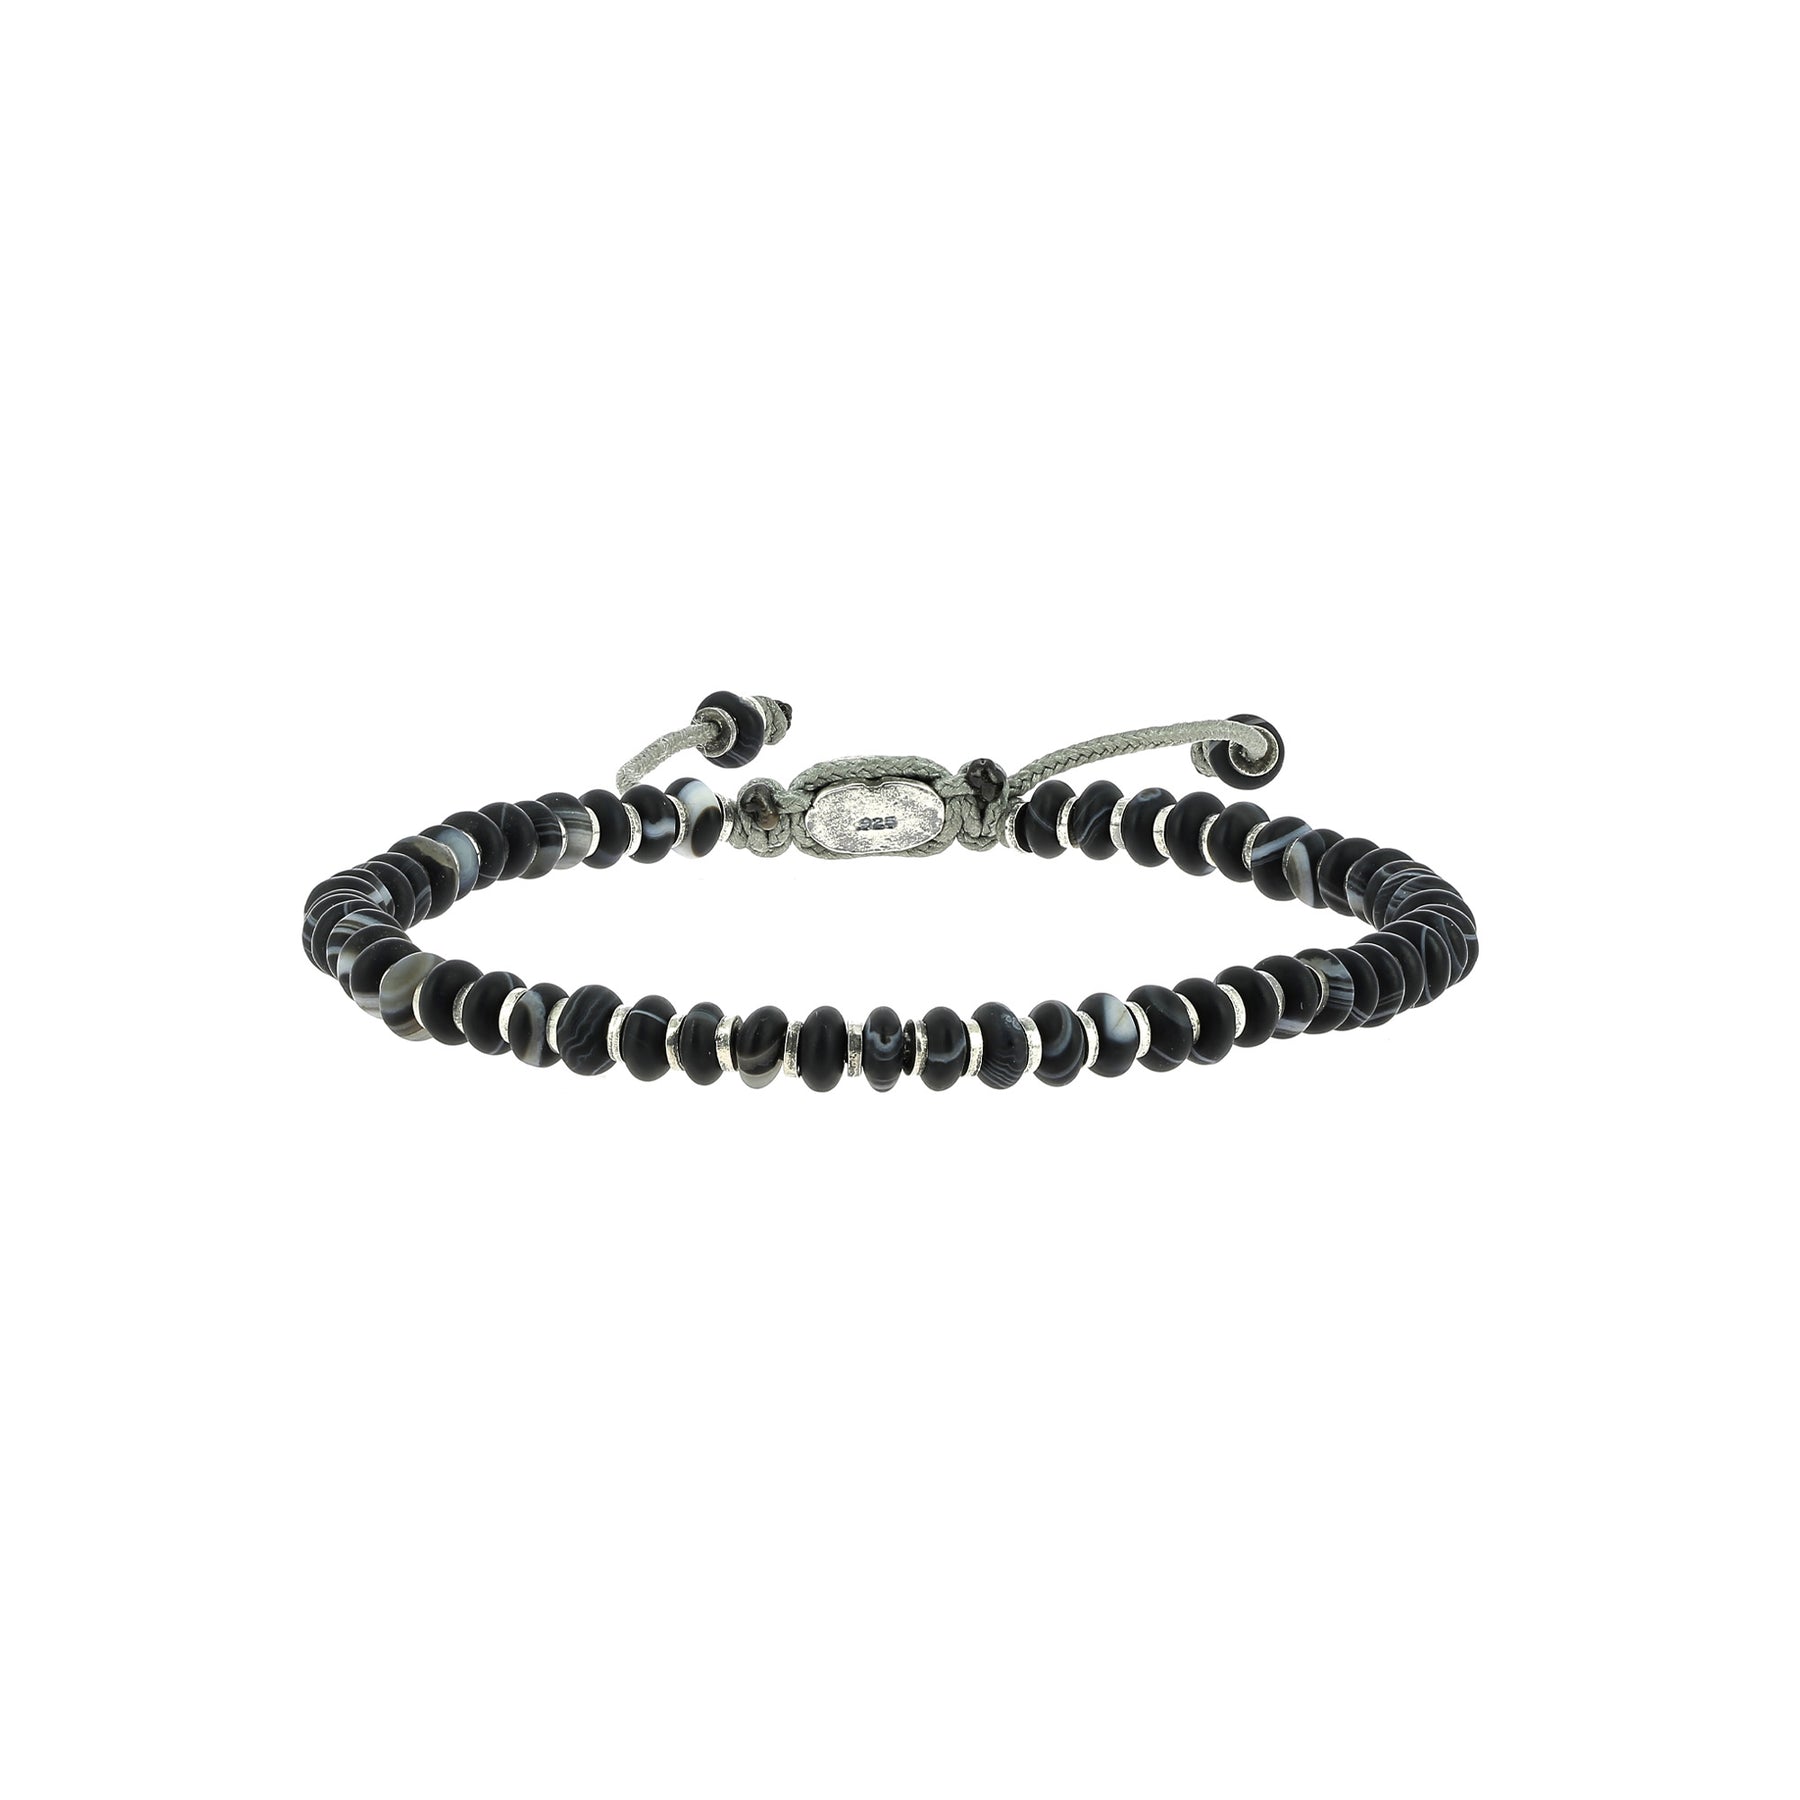 The Simple Black and White Agate Axis Armband